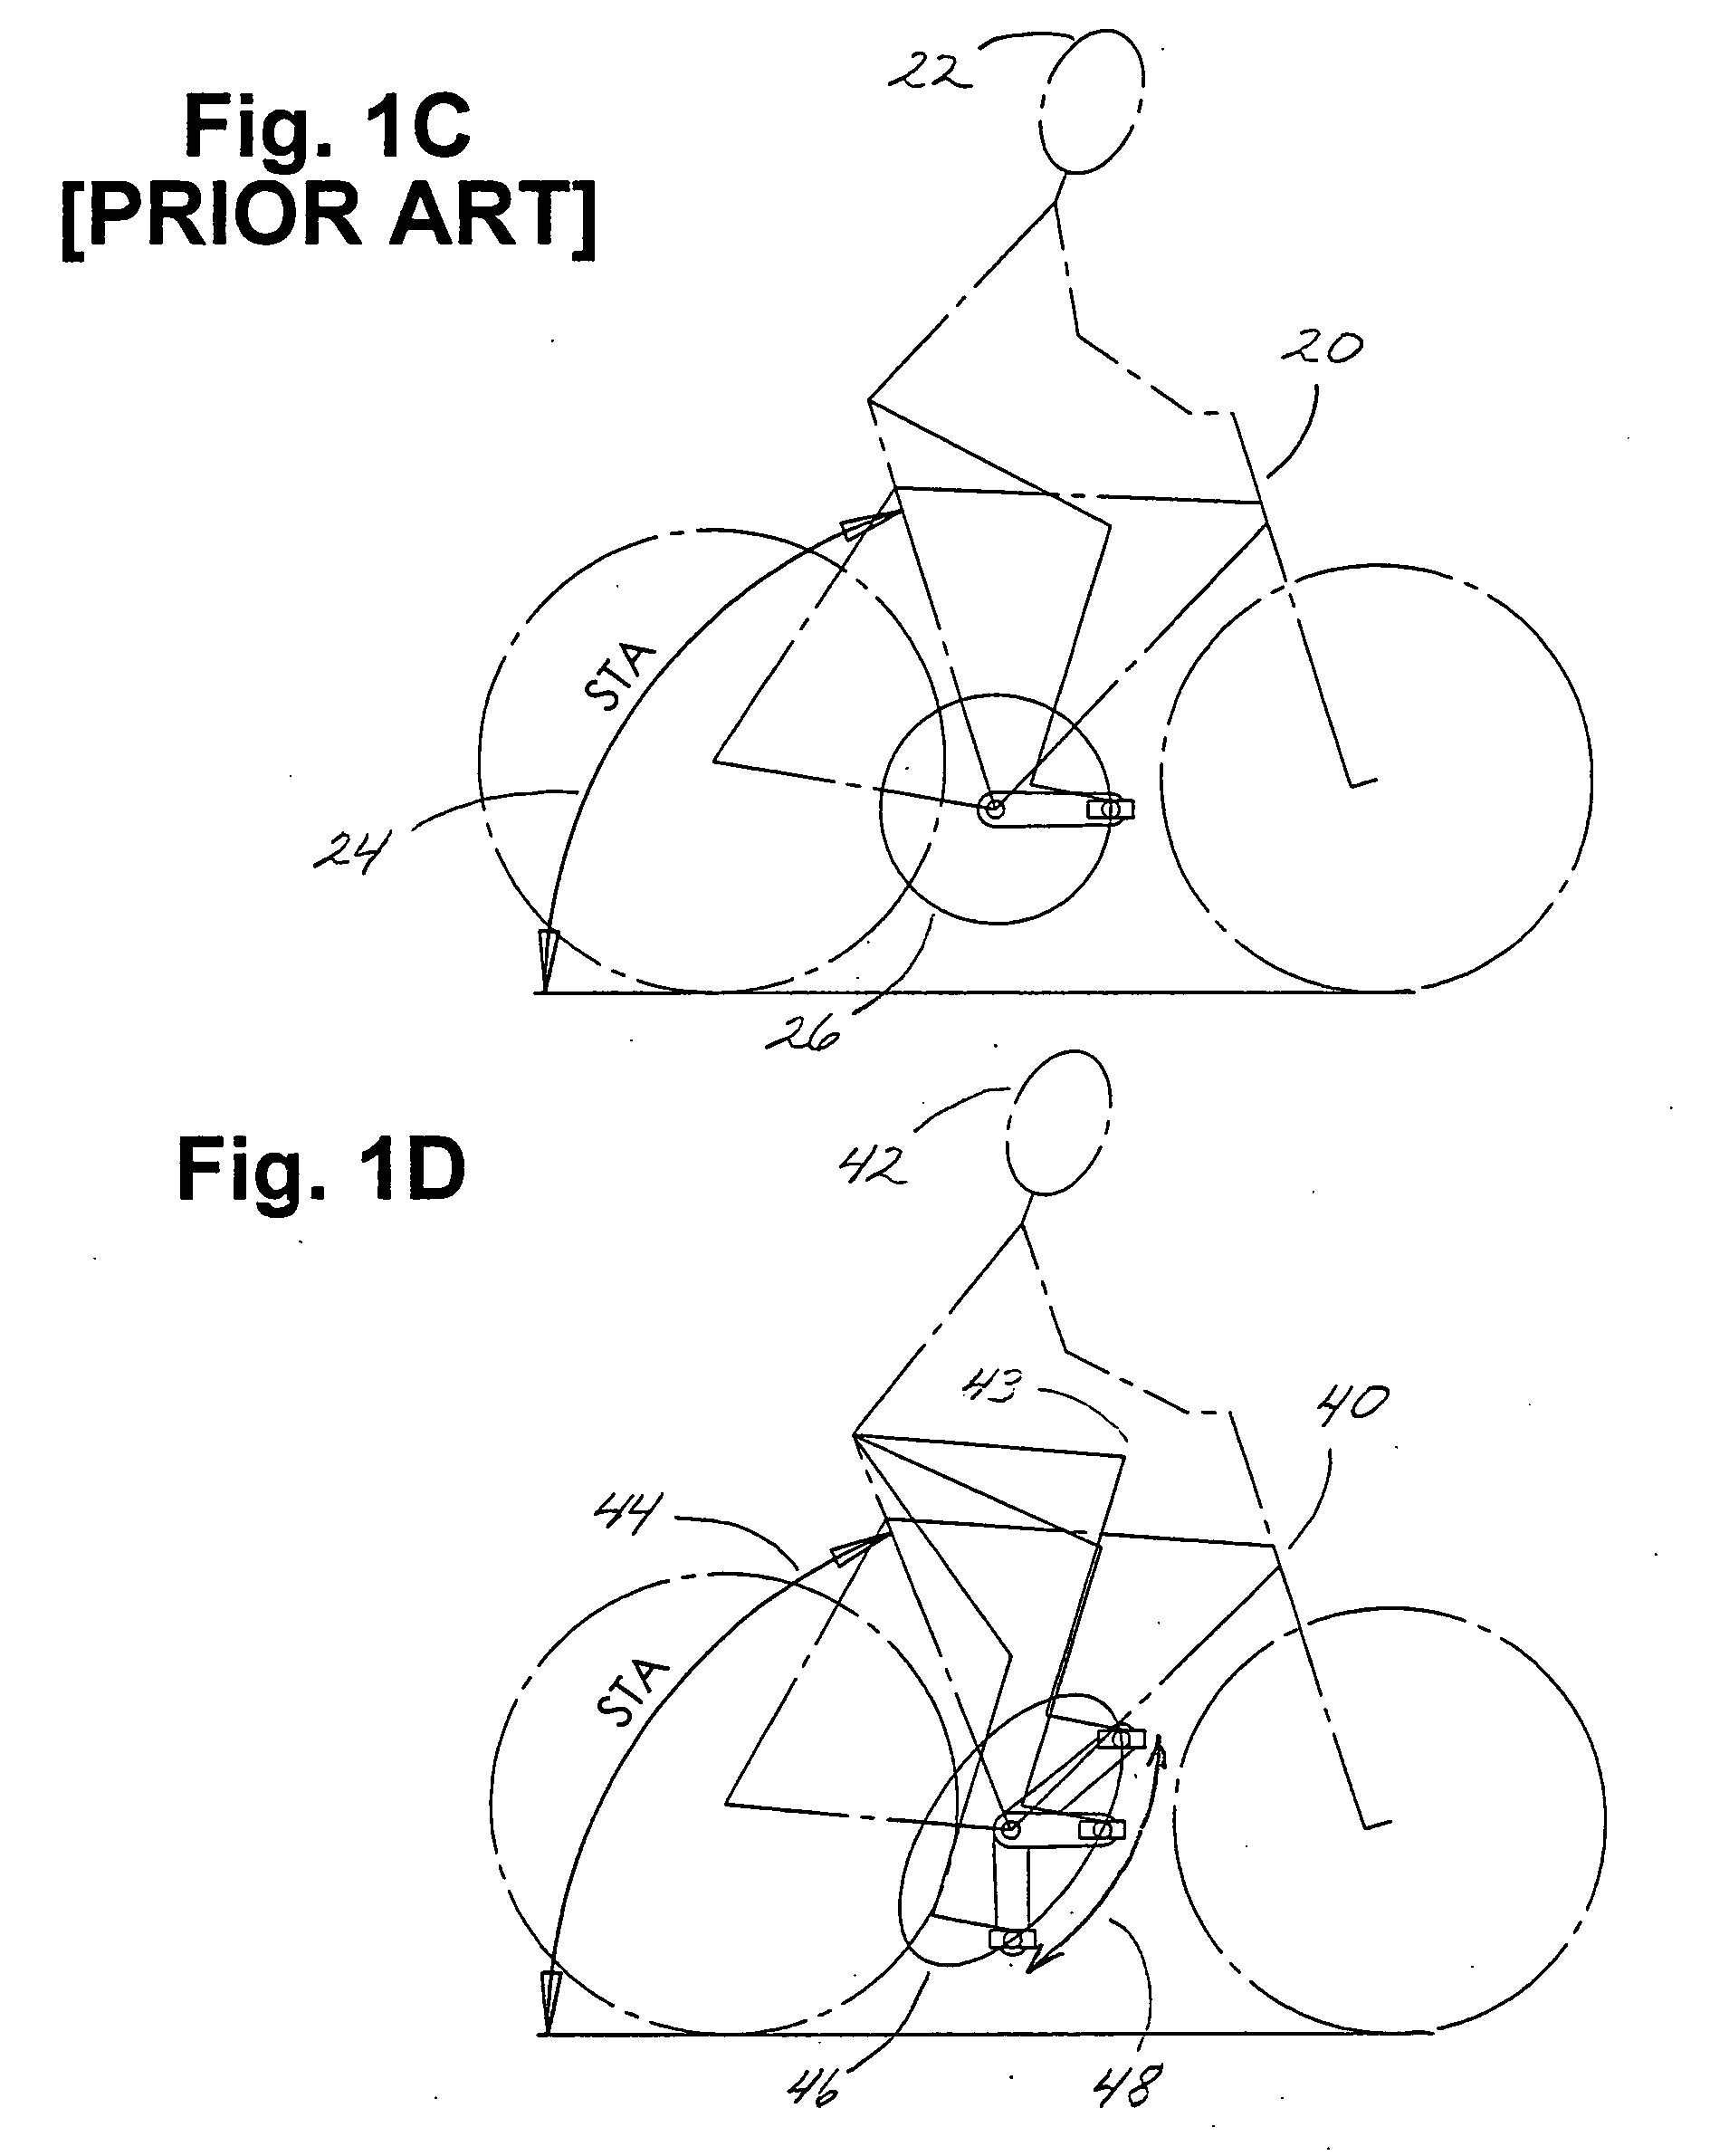 Bicycle having frame geometry, elliptical pedaling path, and seat configuration to increase efficiency and comfort